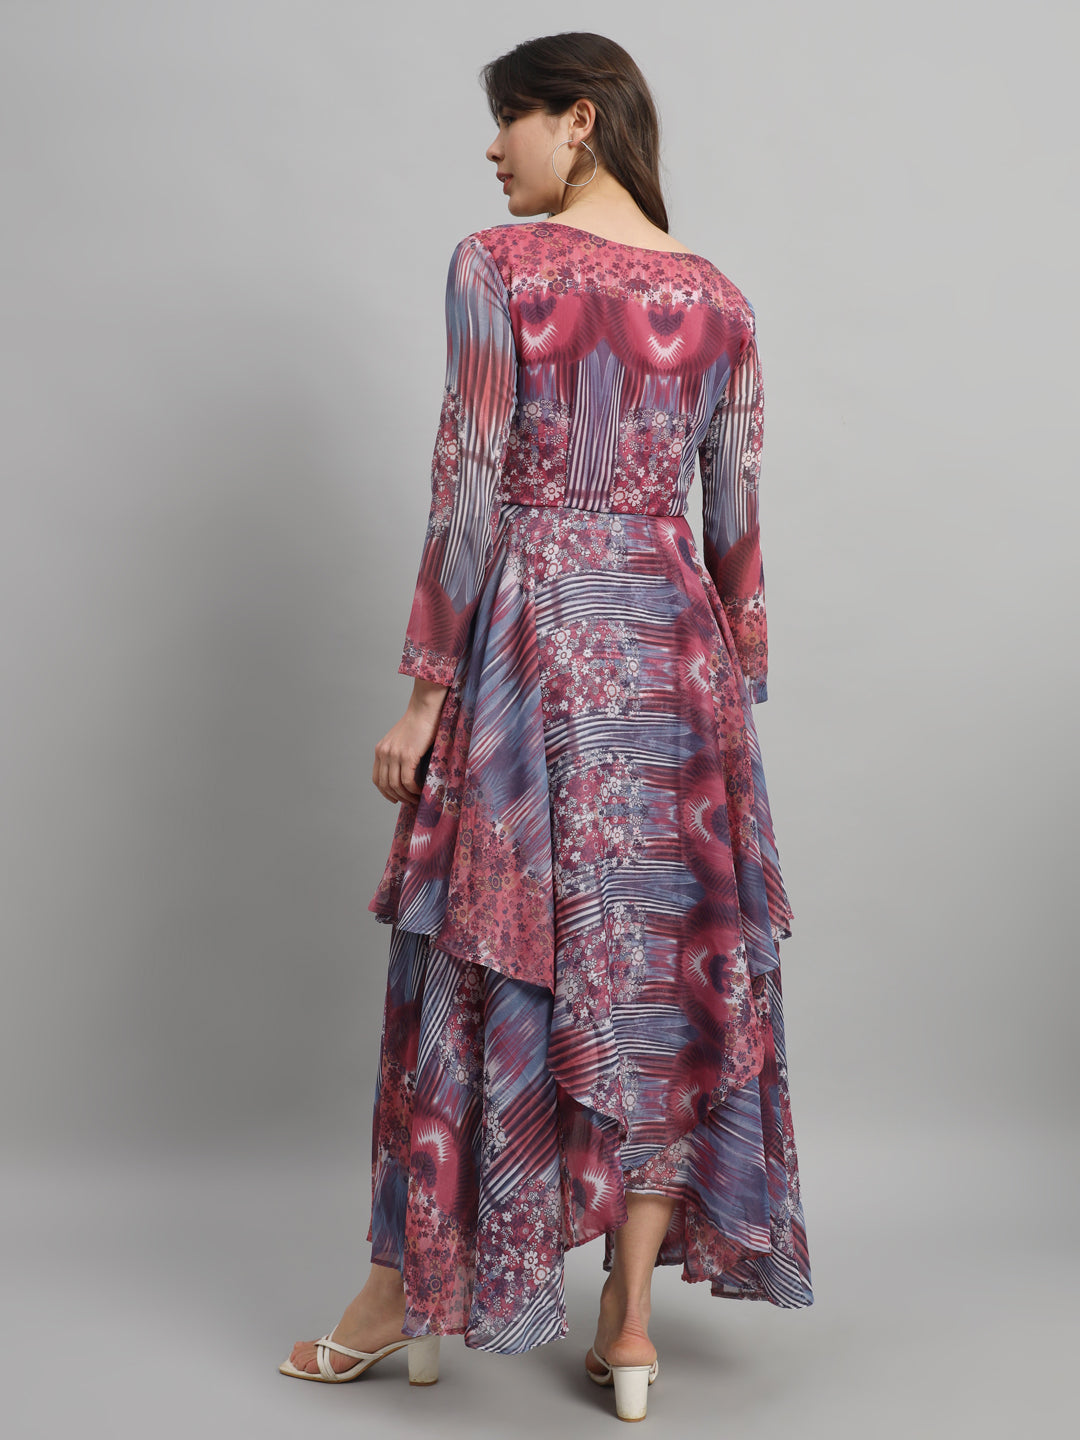 SCORPIUS Round neck Long Sleeves Floral Print Georgette Maxi Dress